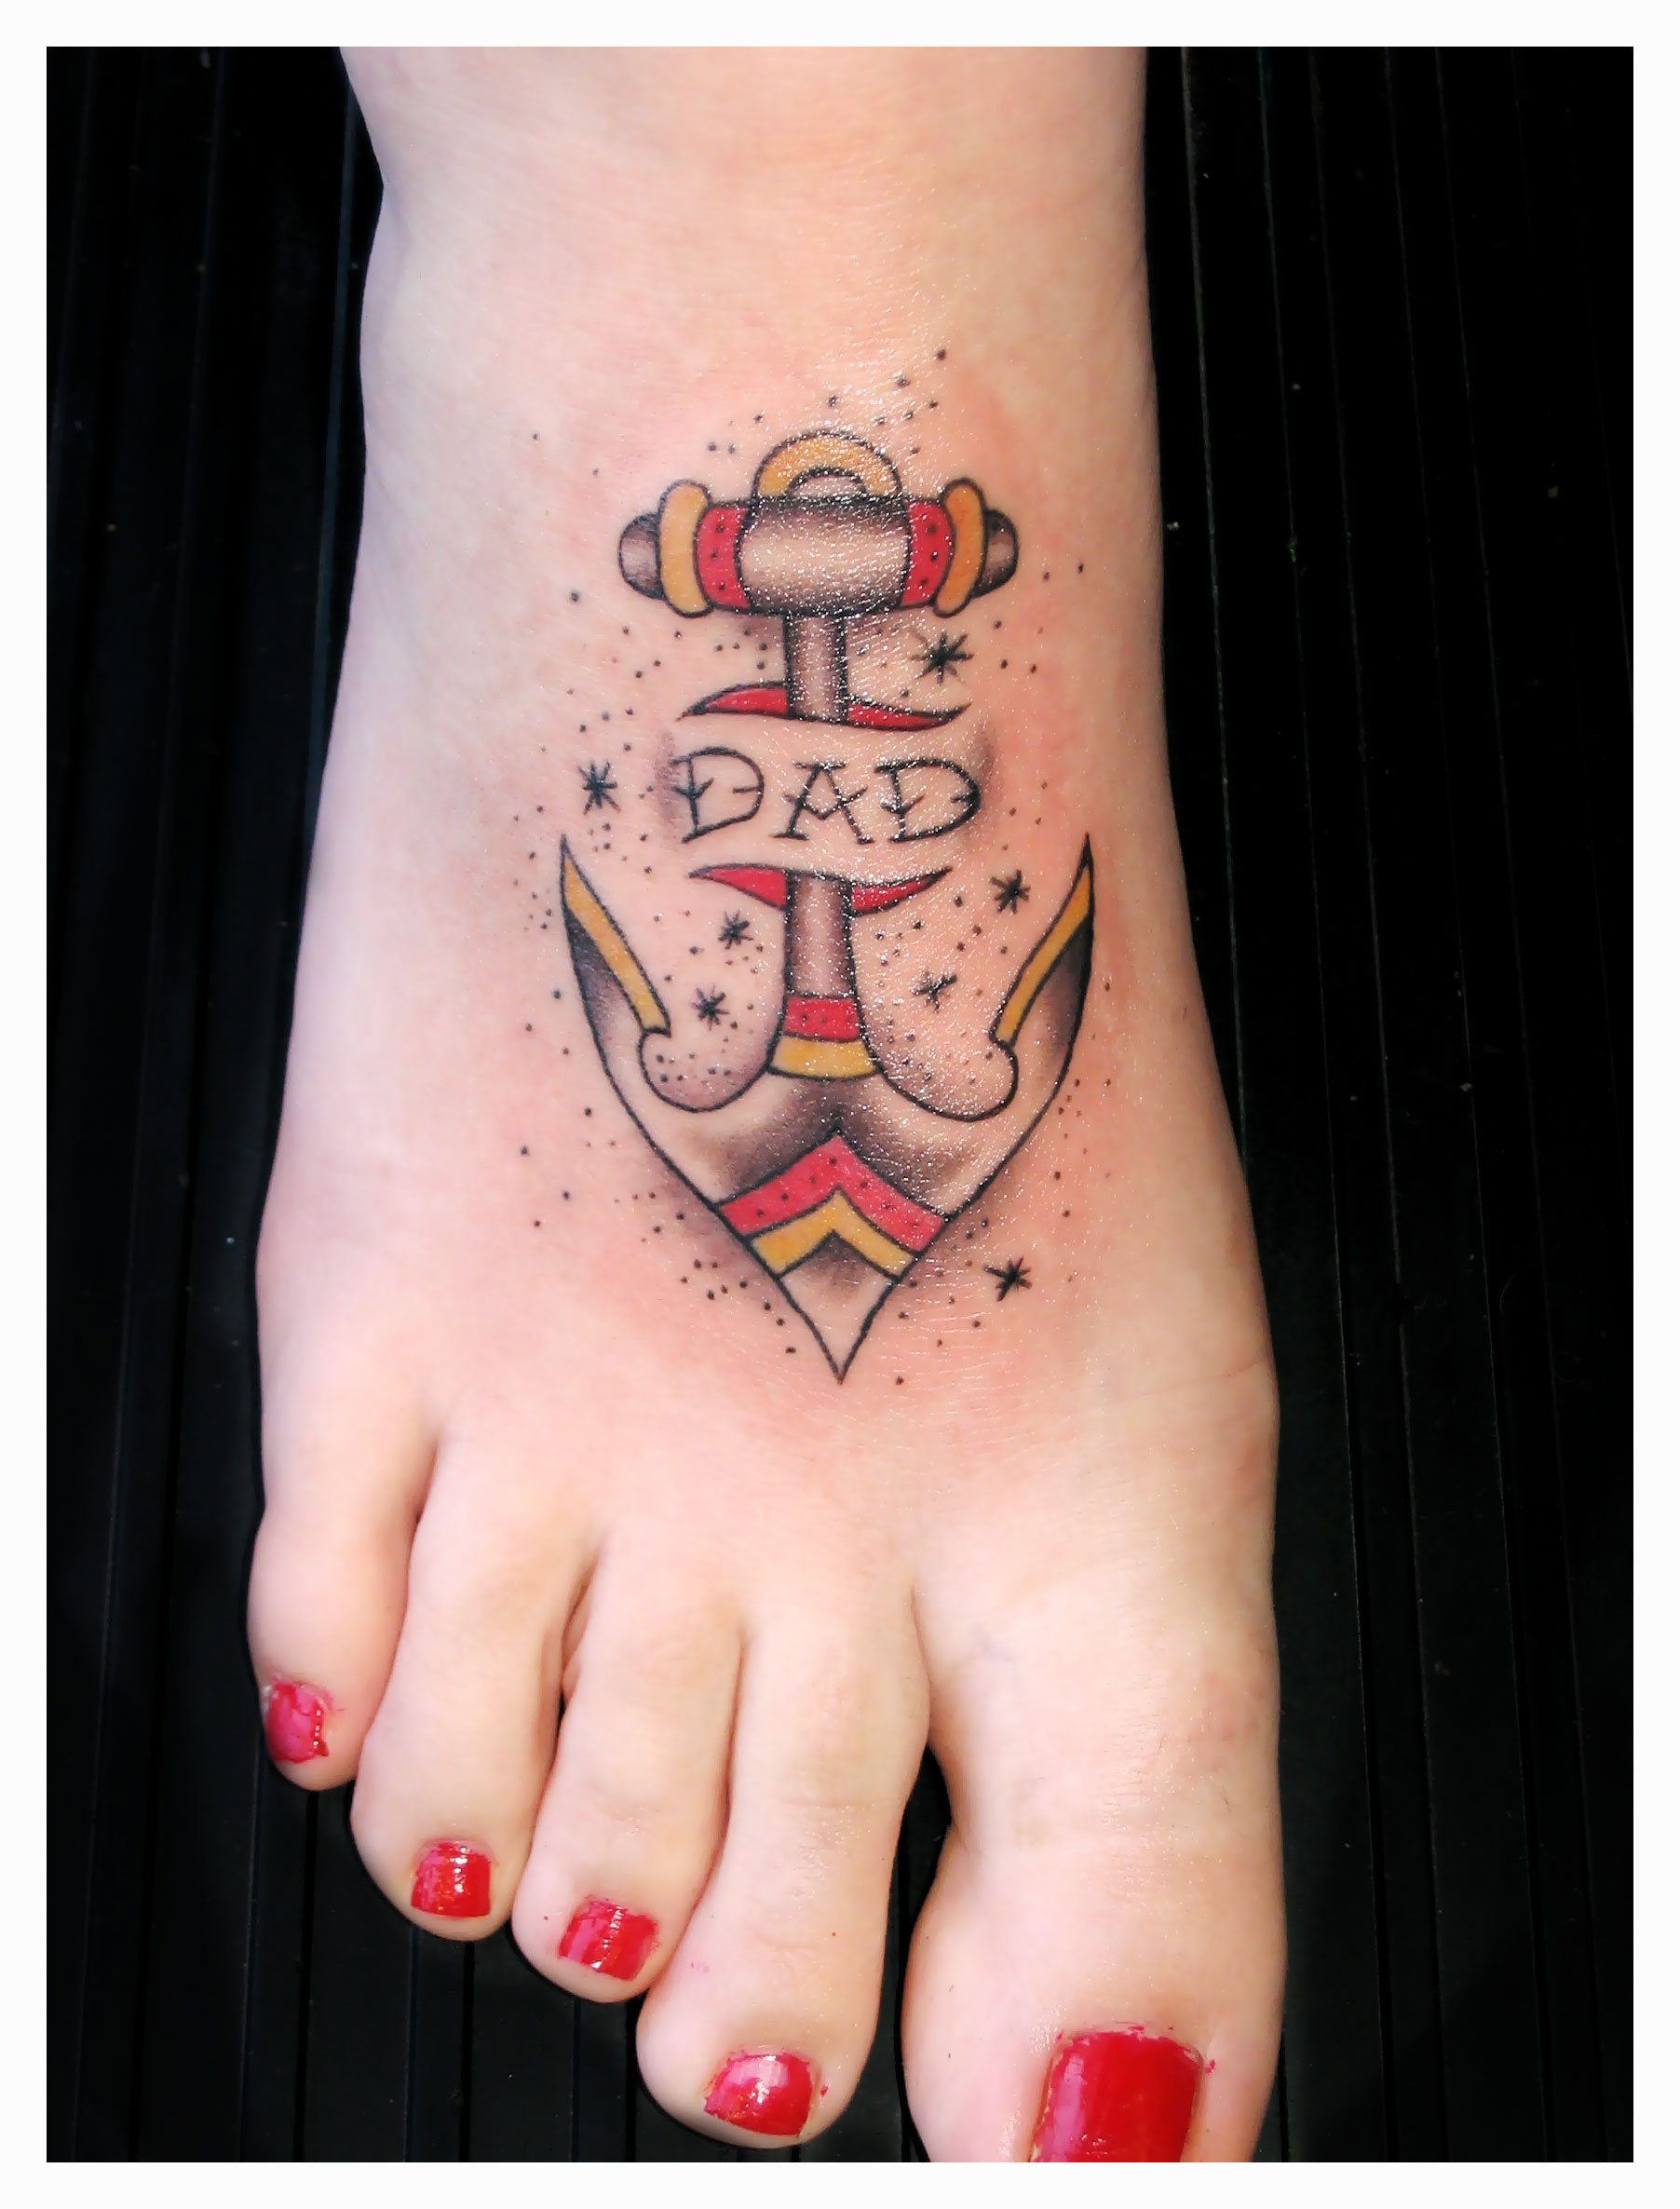 Remarkable Anchor Tattoo Designs For Girls 